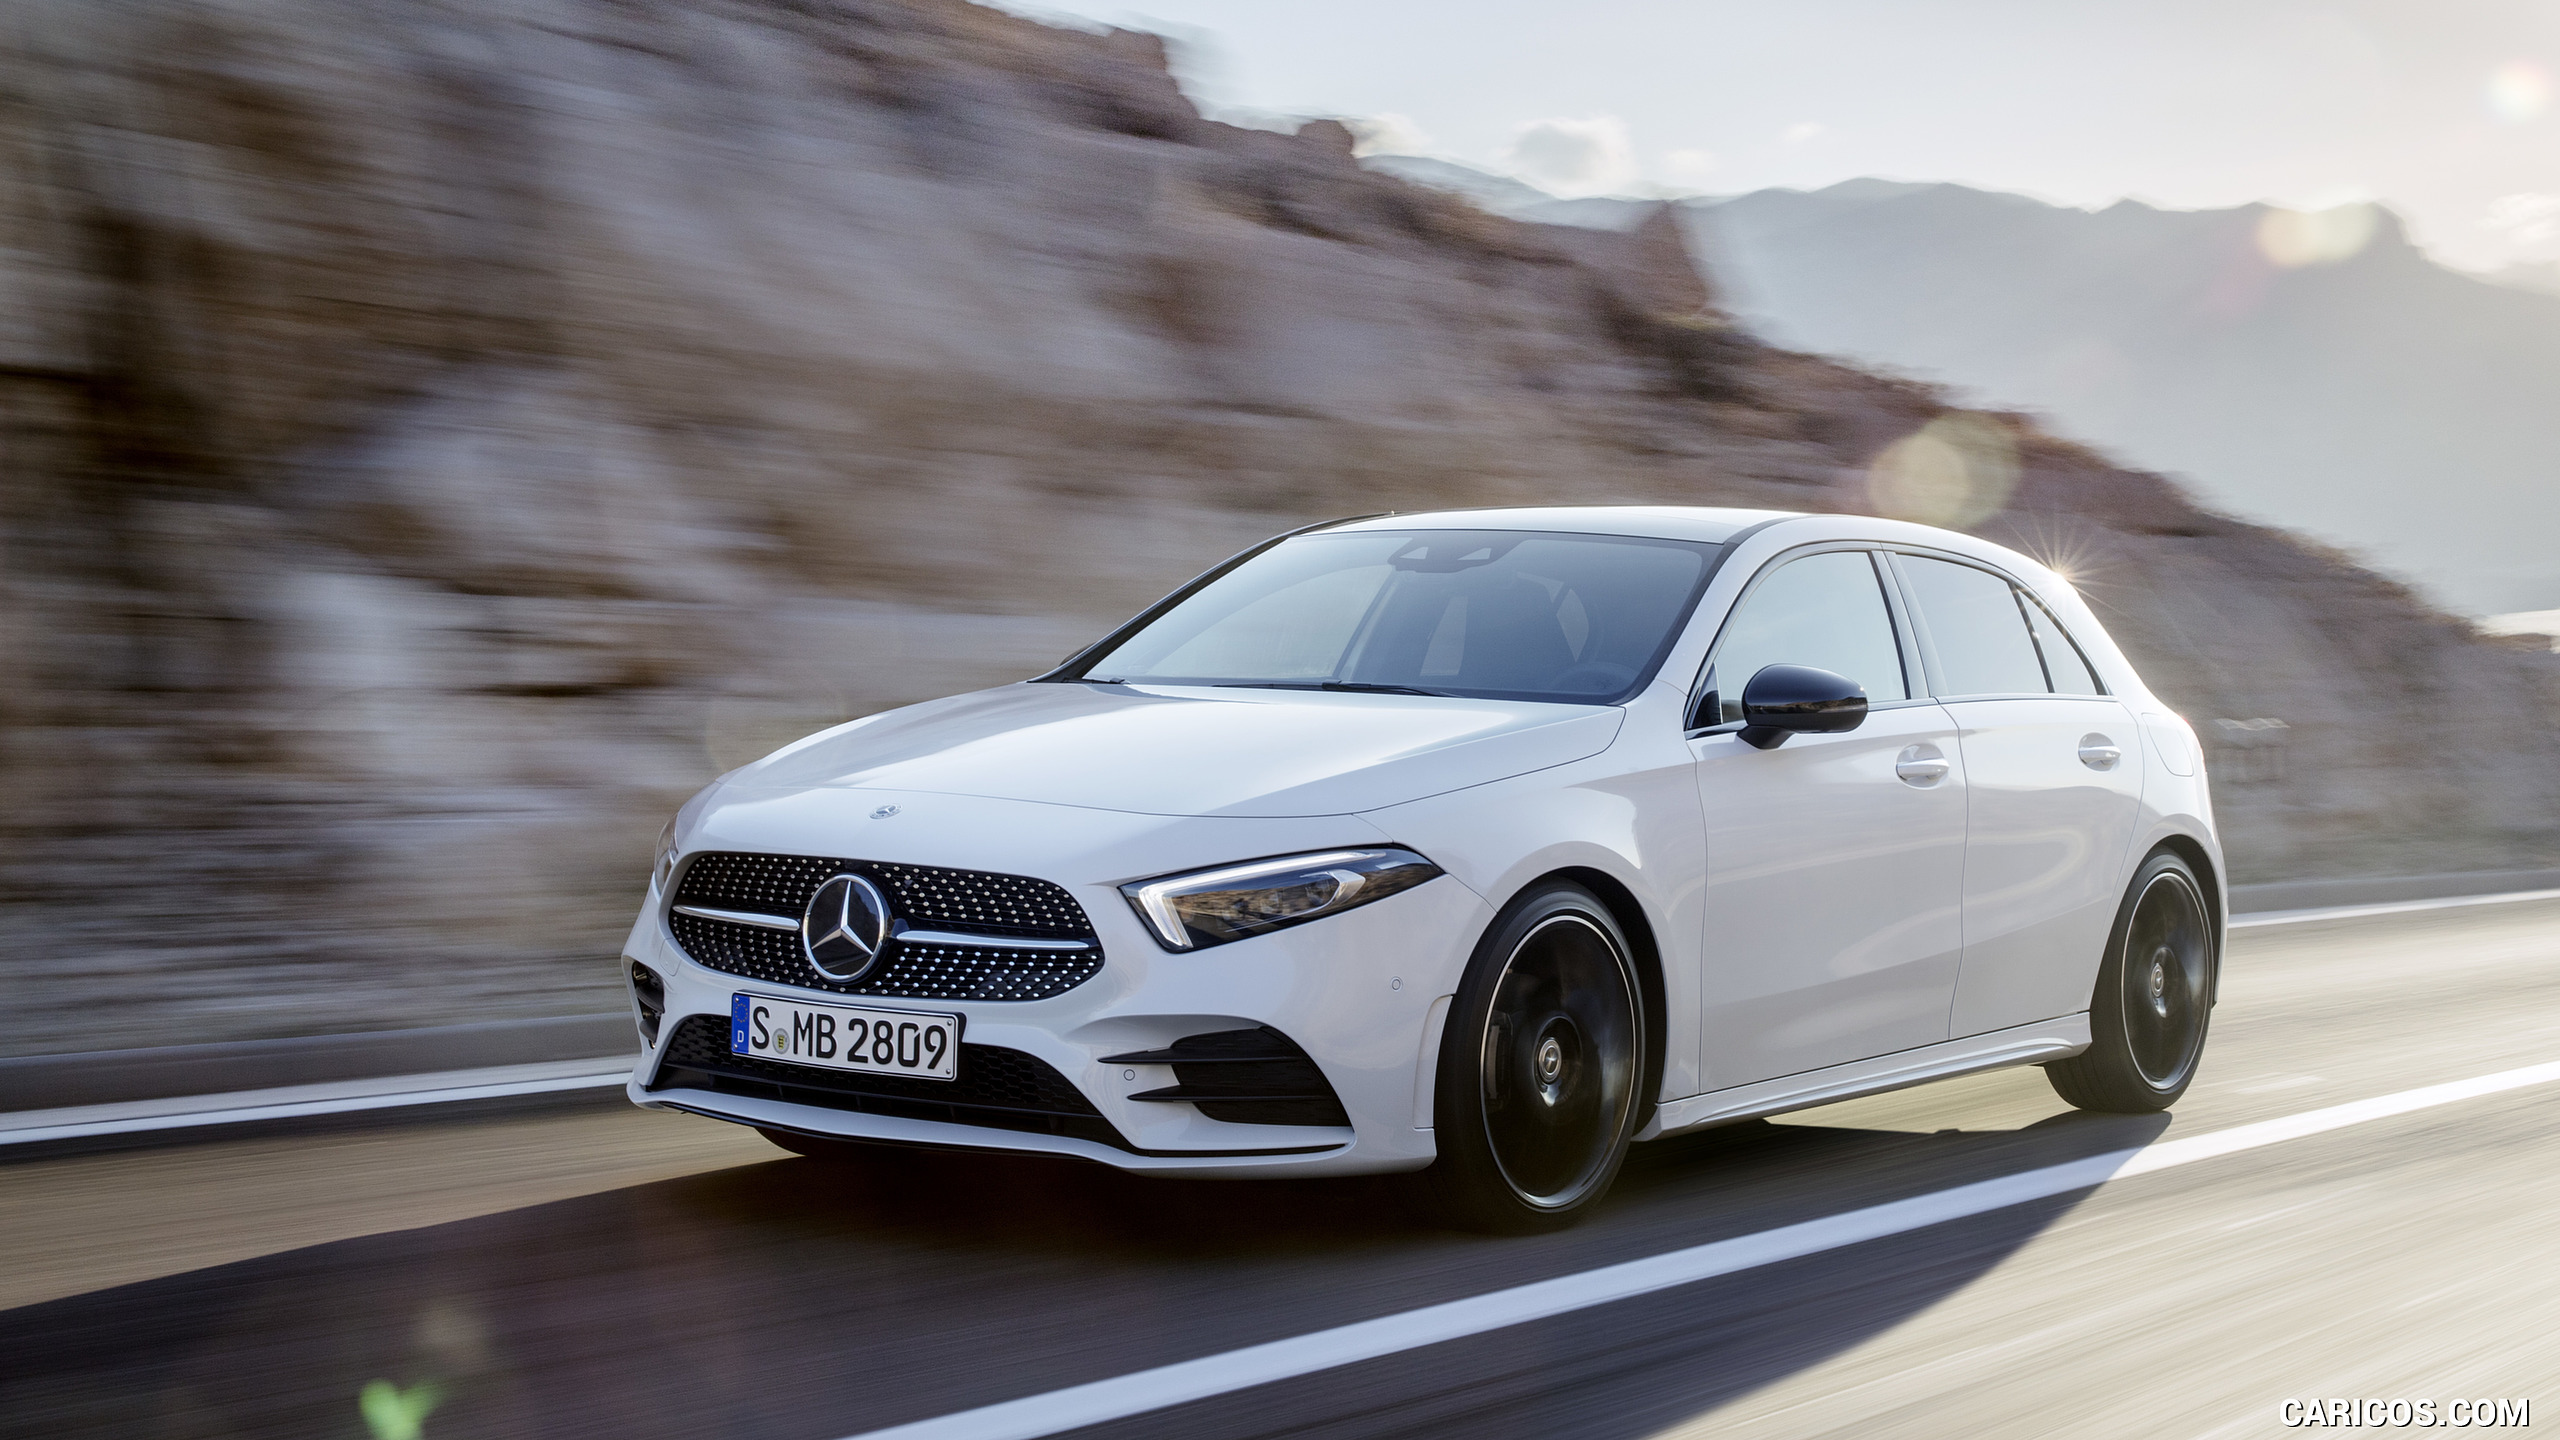 2019 Mercedes-Benz A-Class (Color: Digital white pearl) - Front Three-Quarter, #30 of 181